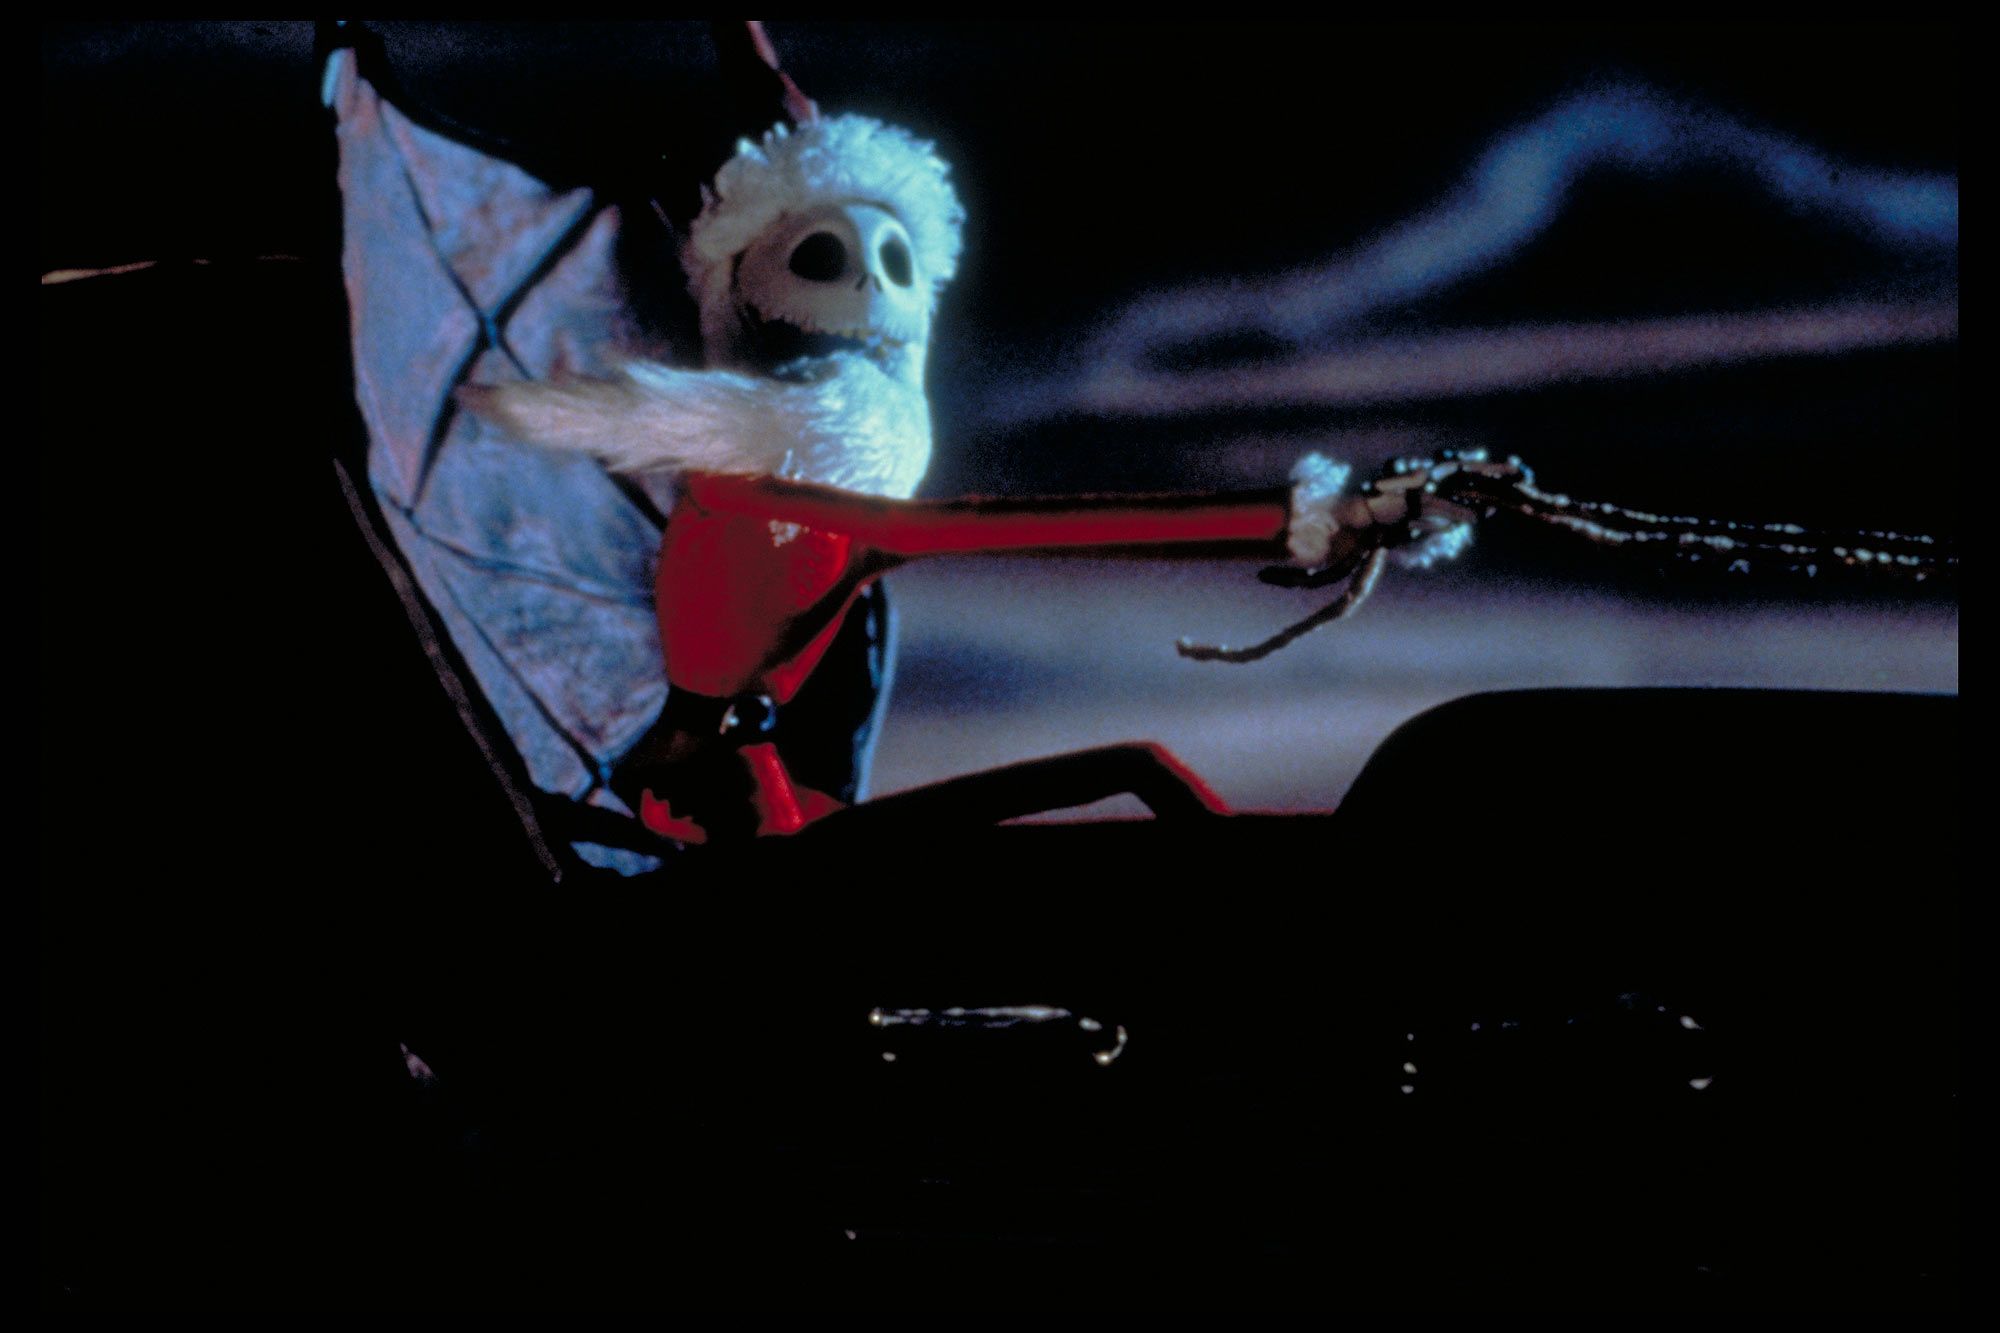 Never-Before-Seen The Nightmare Before Christmas Image